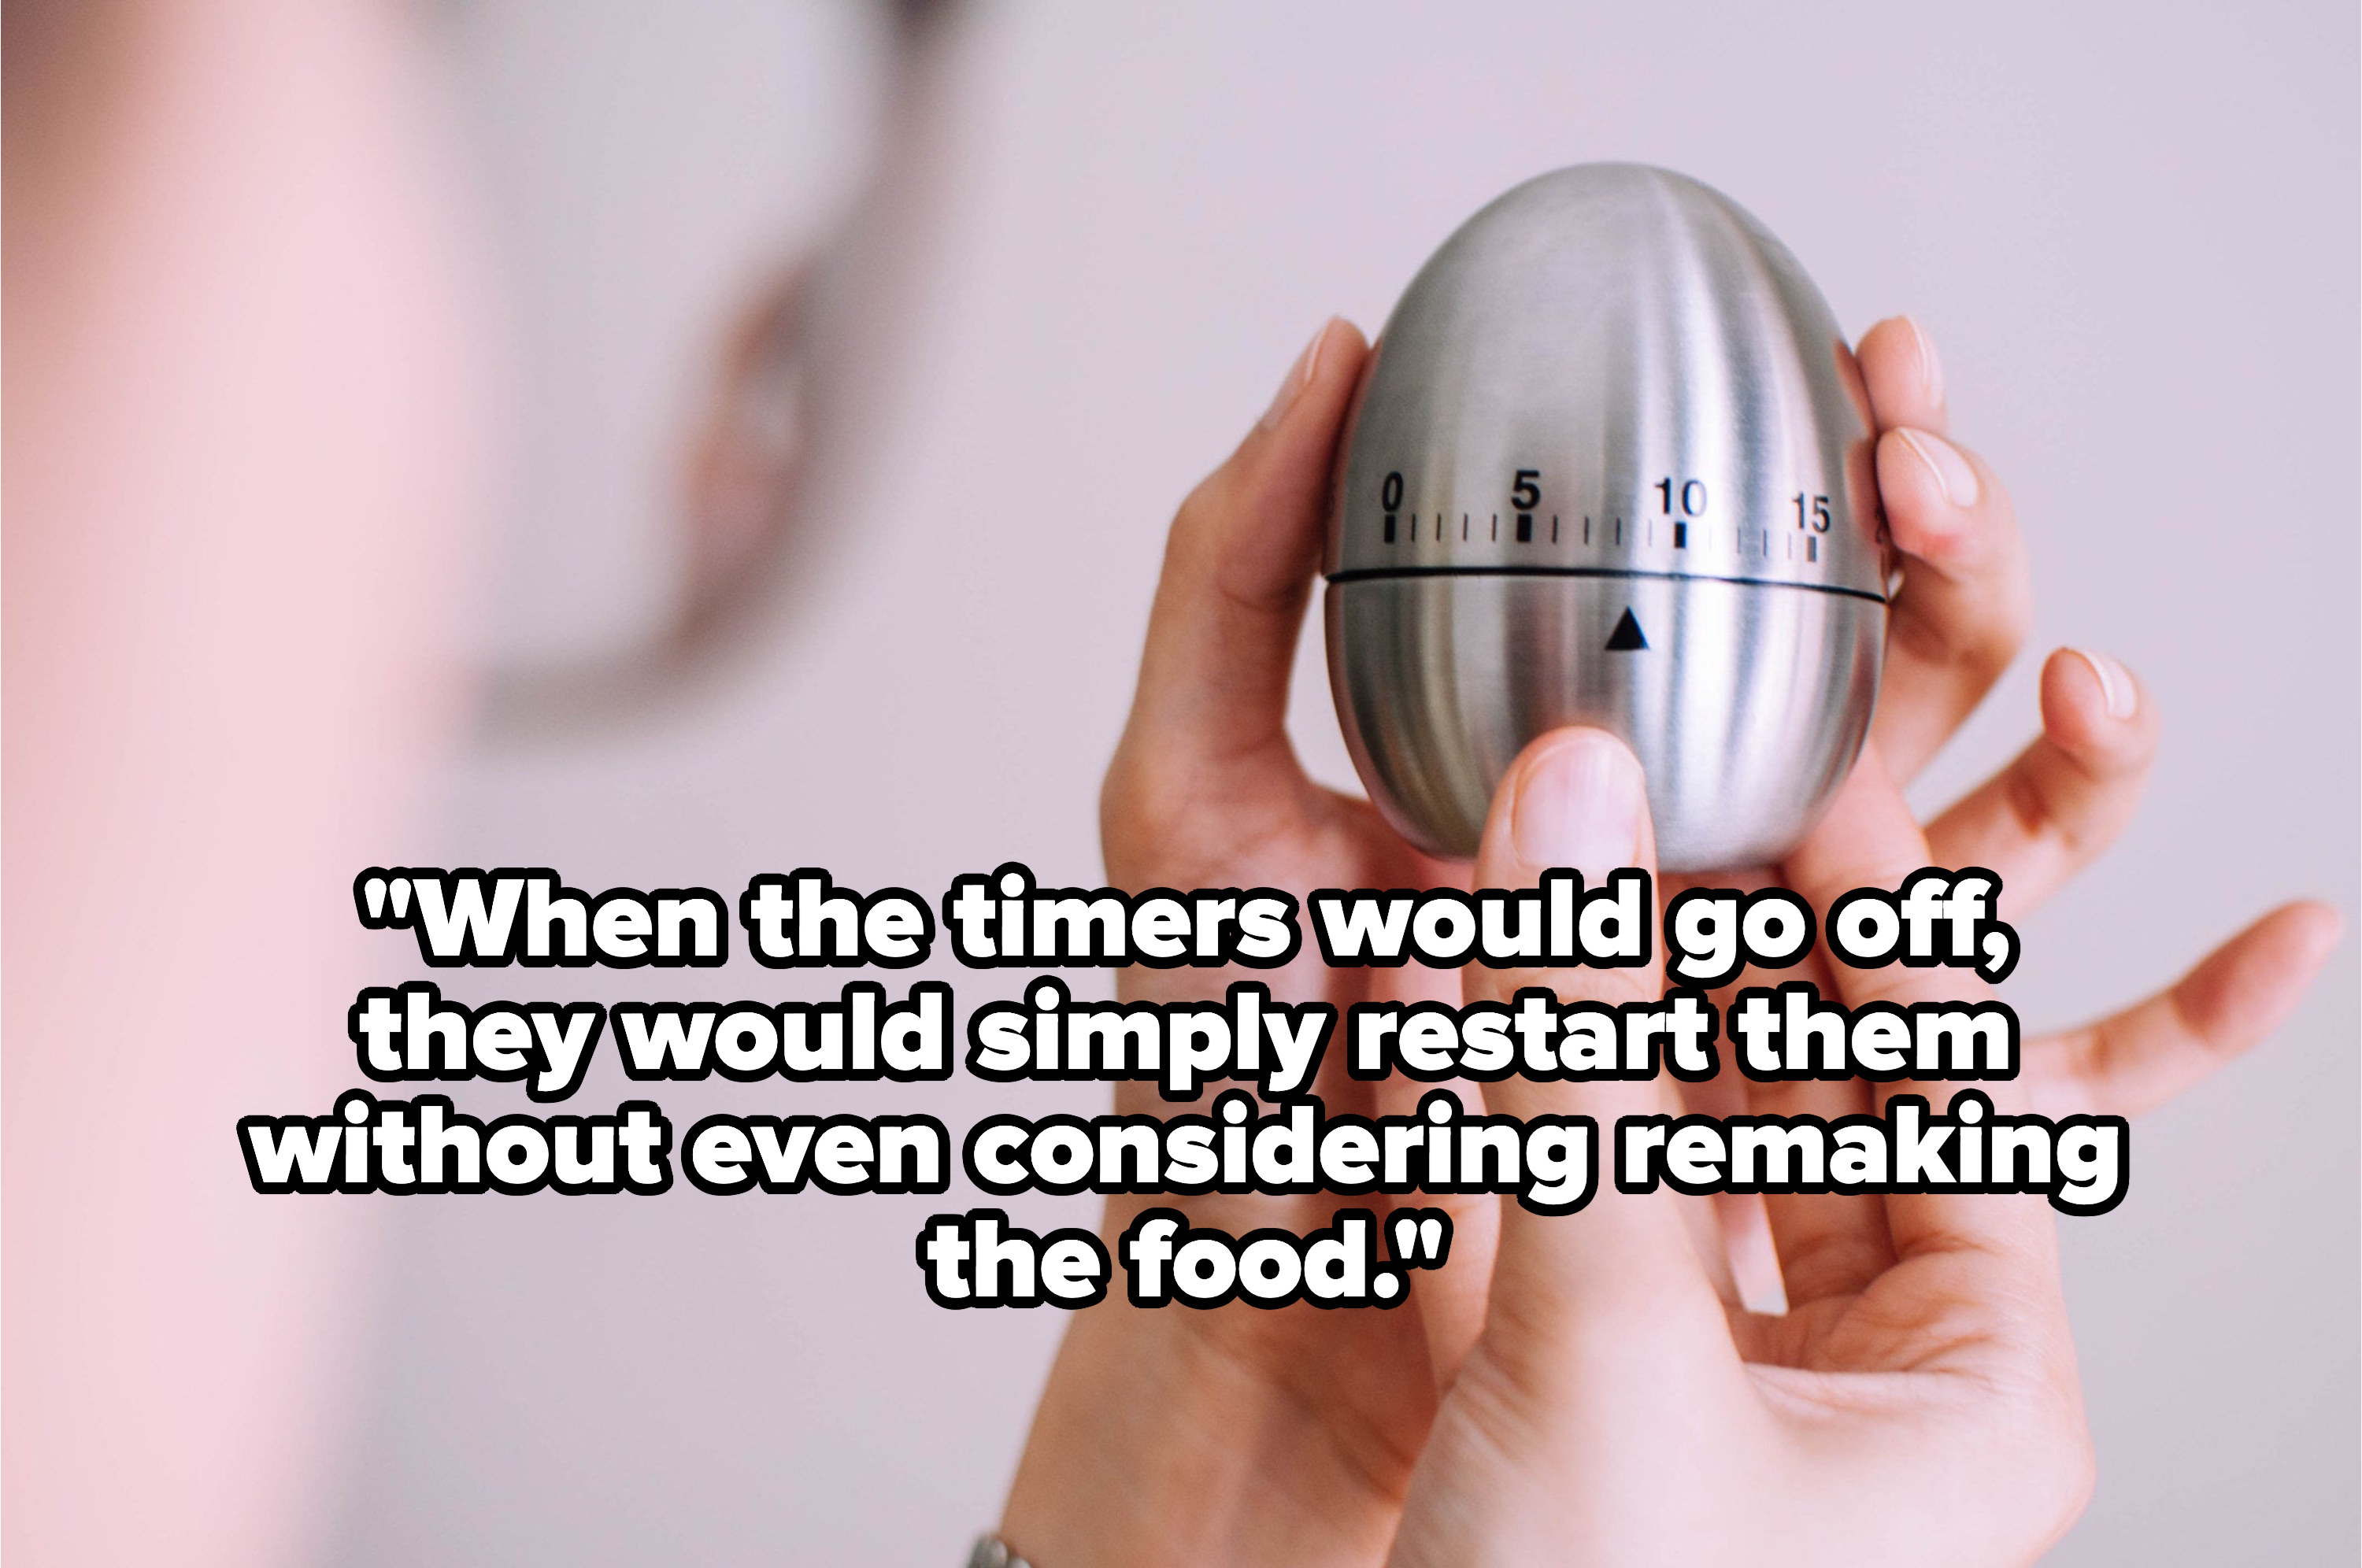 &quot;When the timers would go off, they would simple restart them without even considering remaking the food&quot; over hands holding a food timer